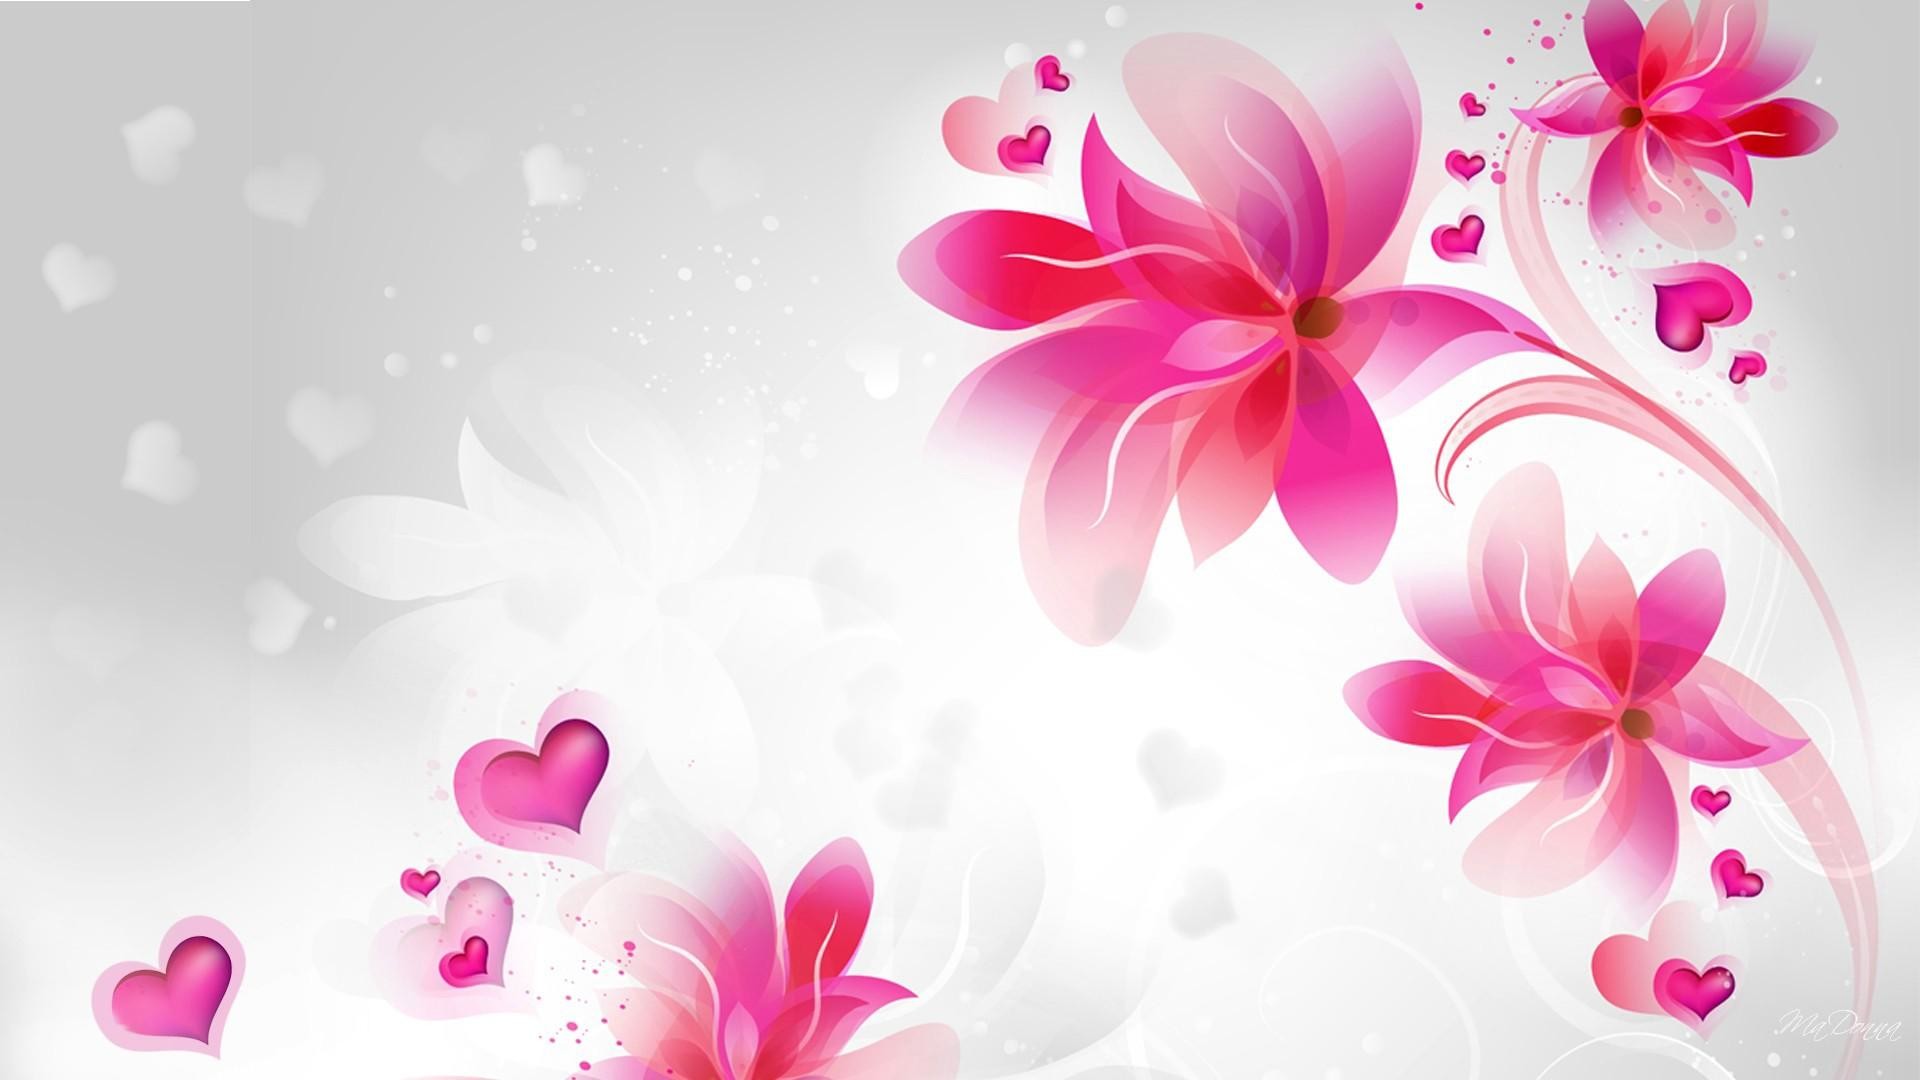 Abstract Flower Wallpapers - Wallpaper Cave